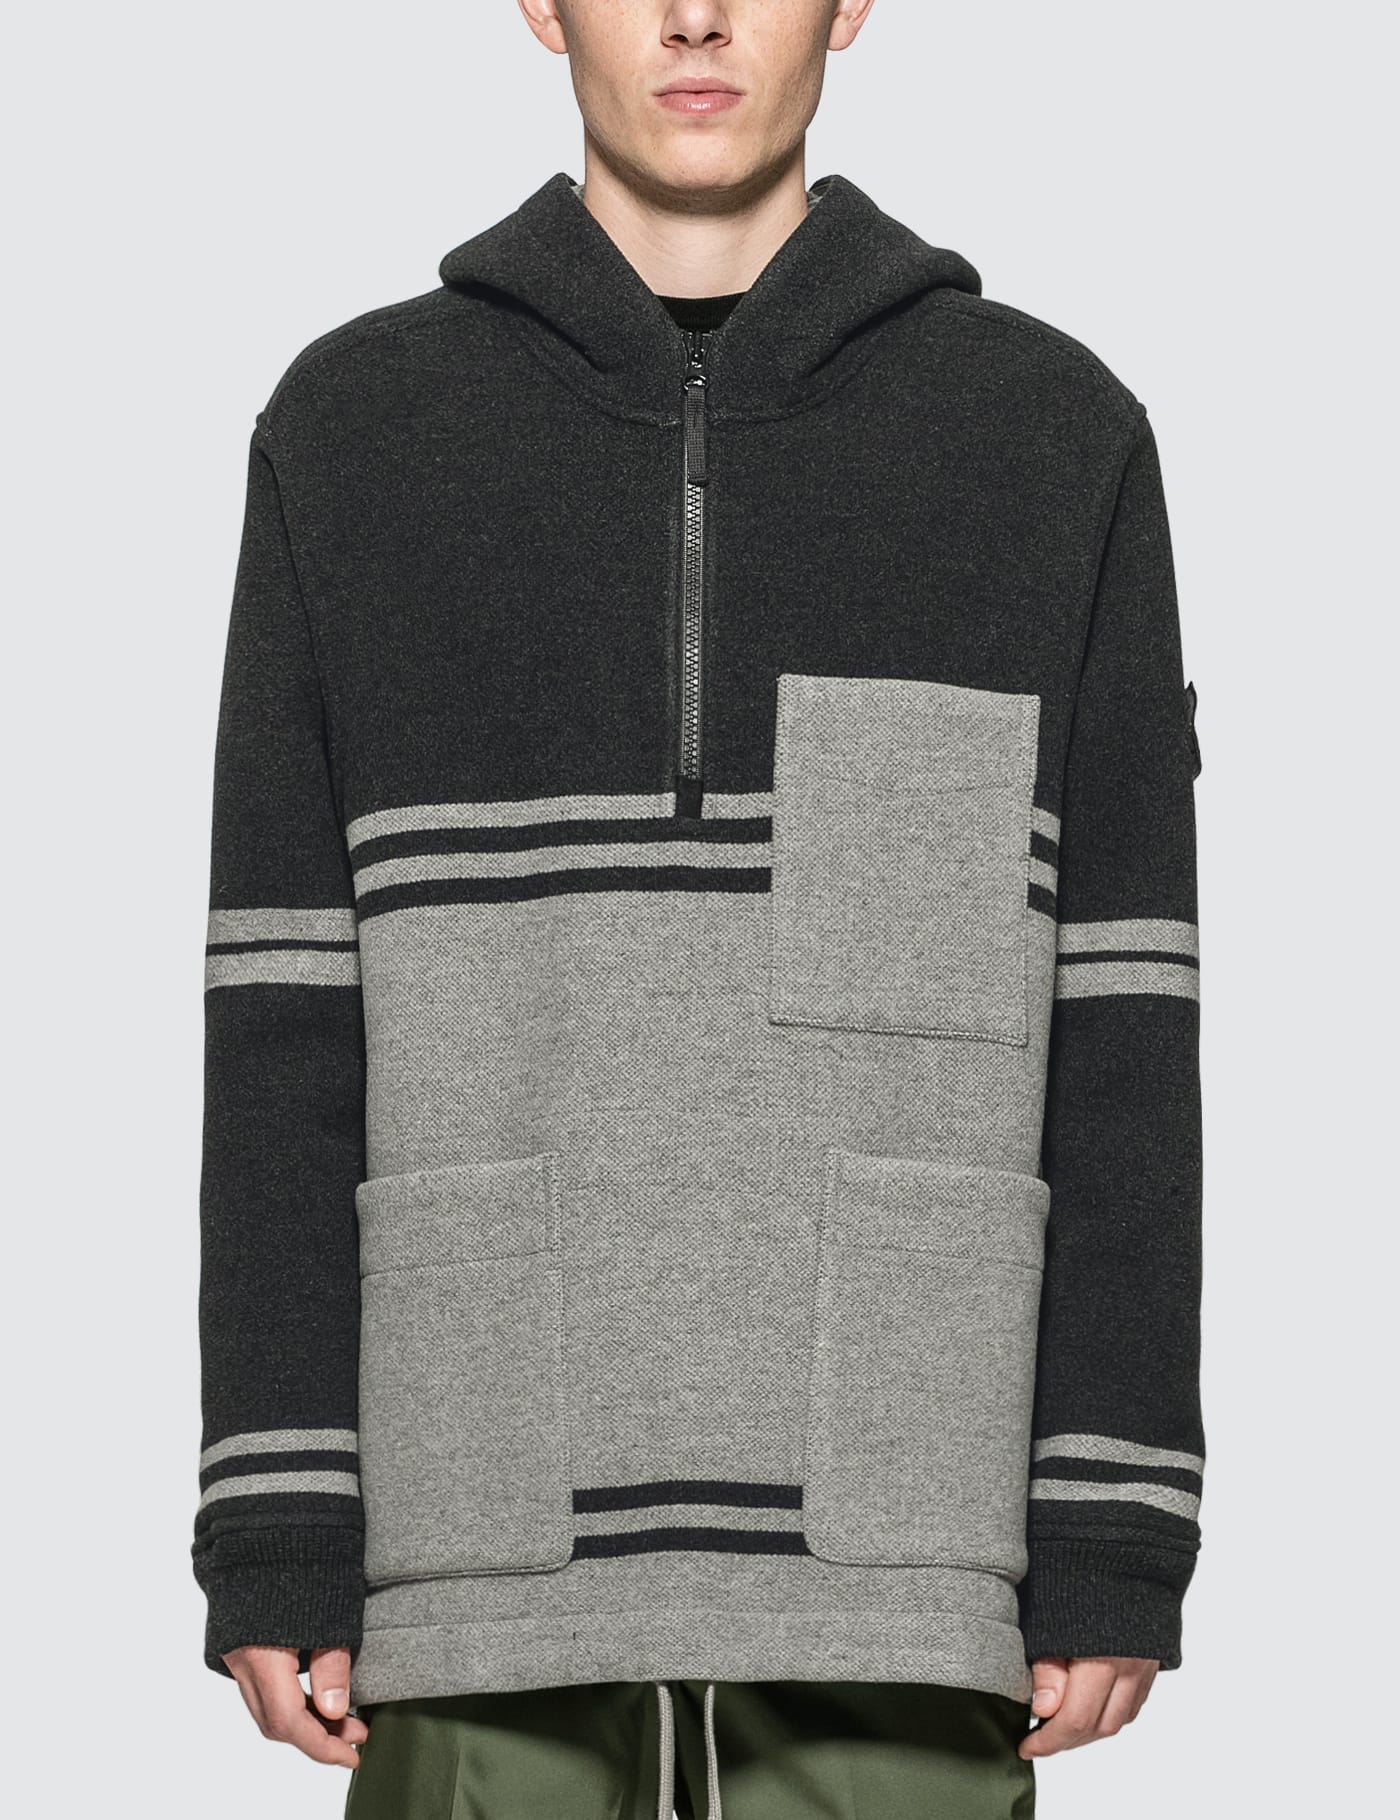 Stone Island - Panno Jacquard | HBX - Globally Curated Fashion and 